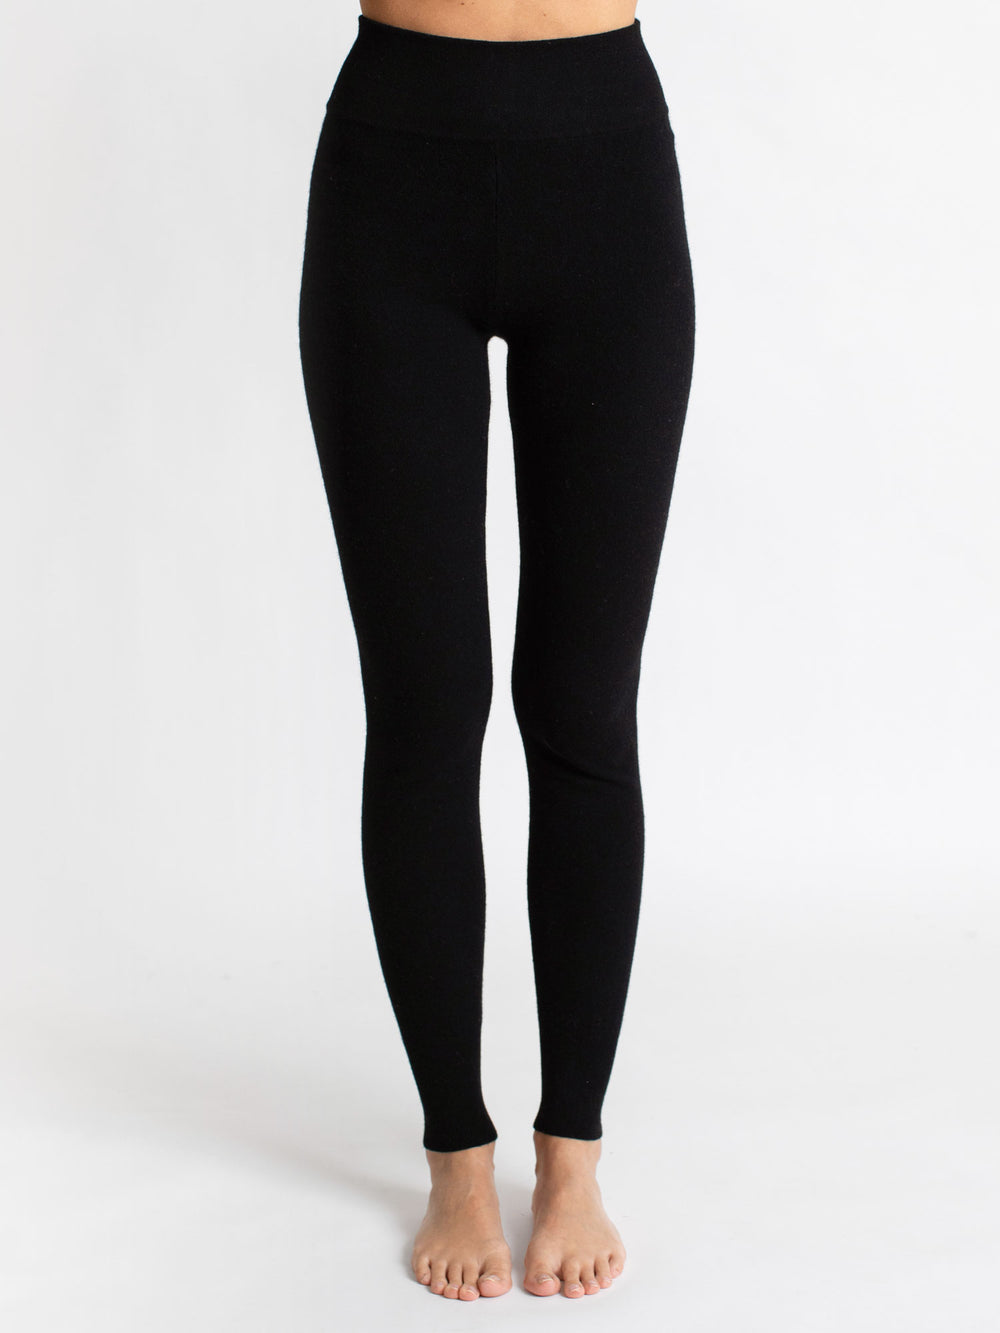 Cashmere pants "Tights" 100% cashmere from norwegian Kashmina